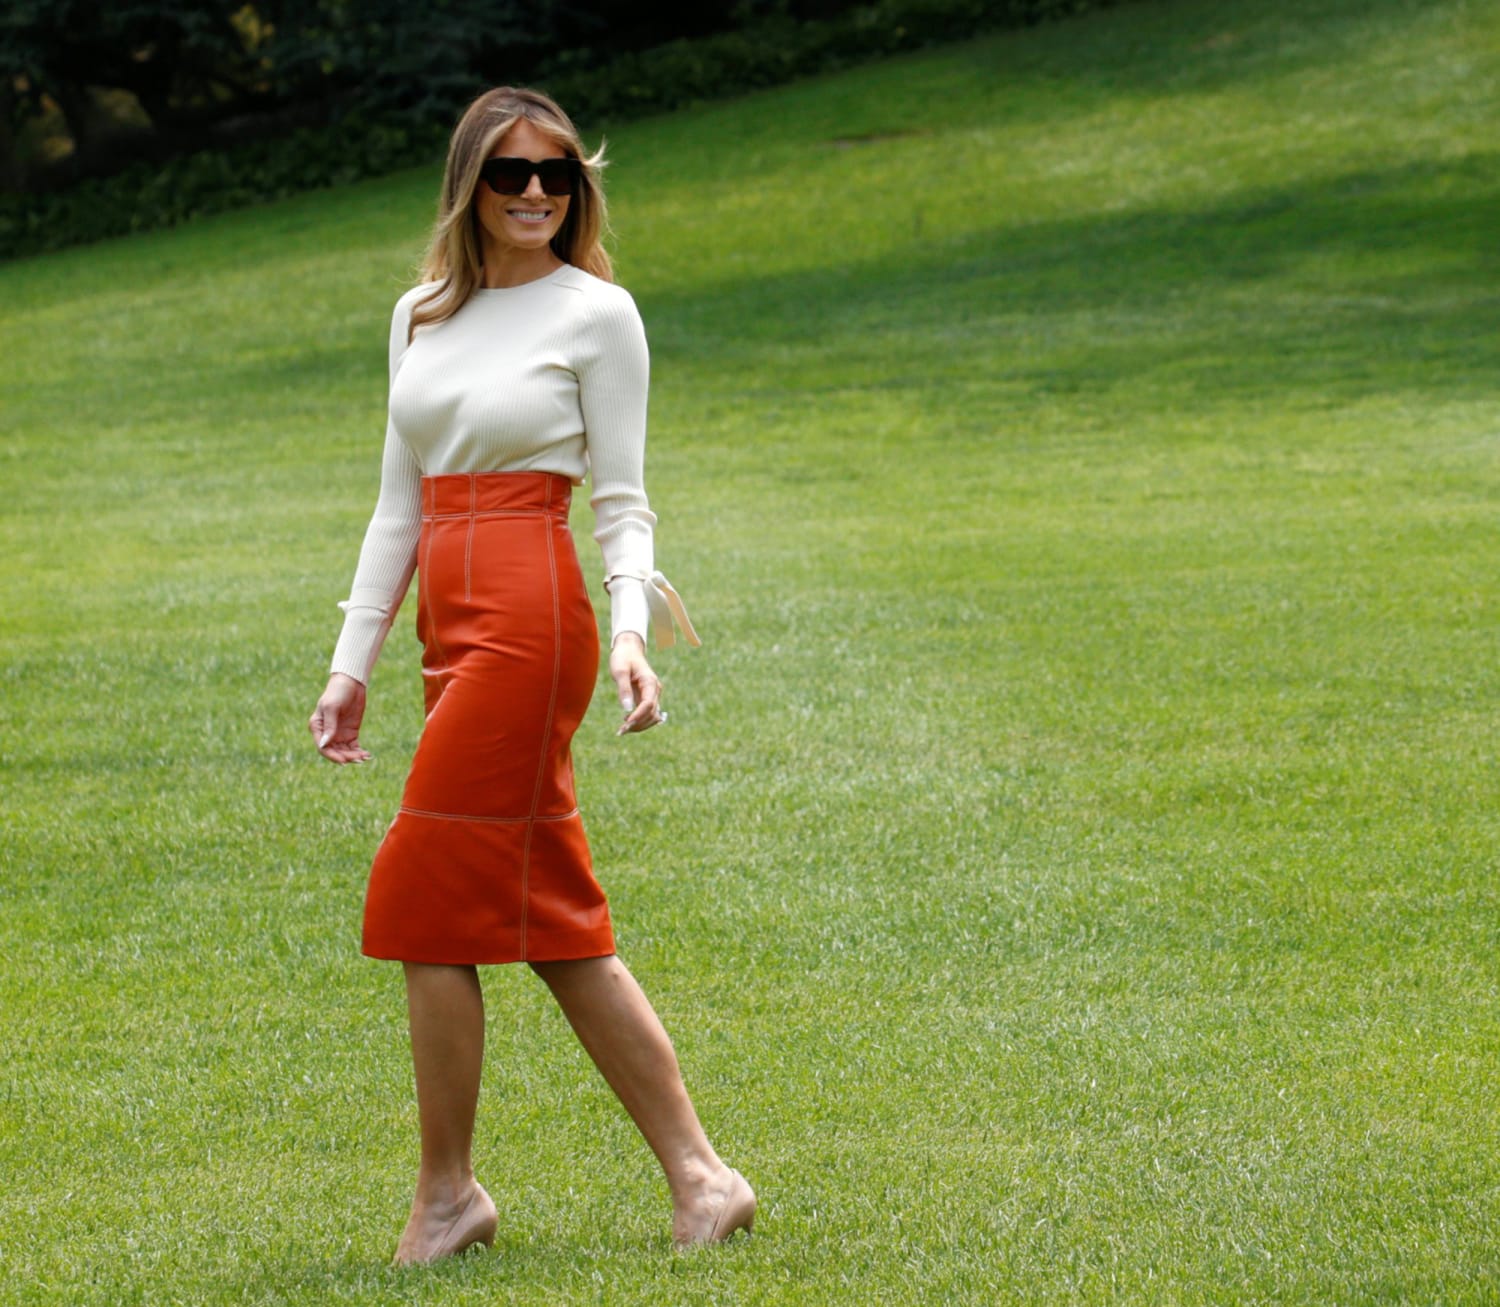 Model, first lady: Melania Trump conspicuously absent from magazine covers